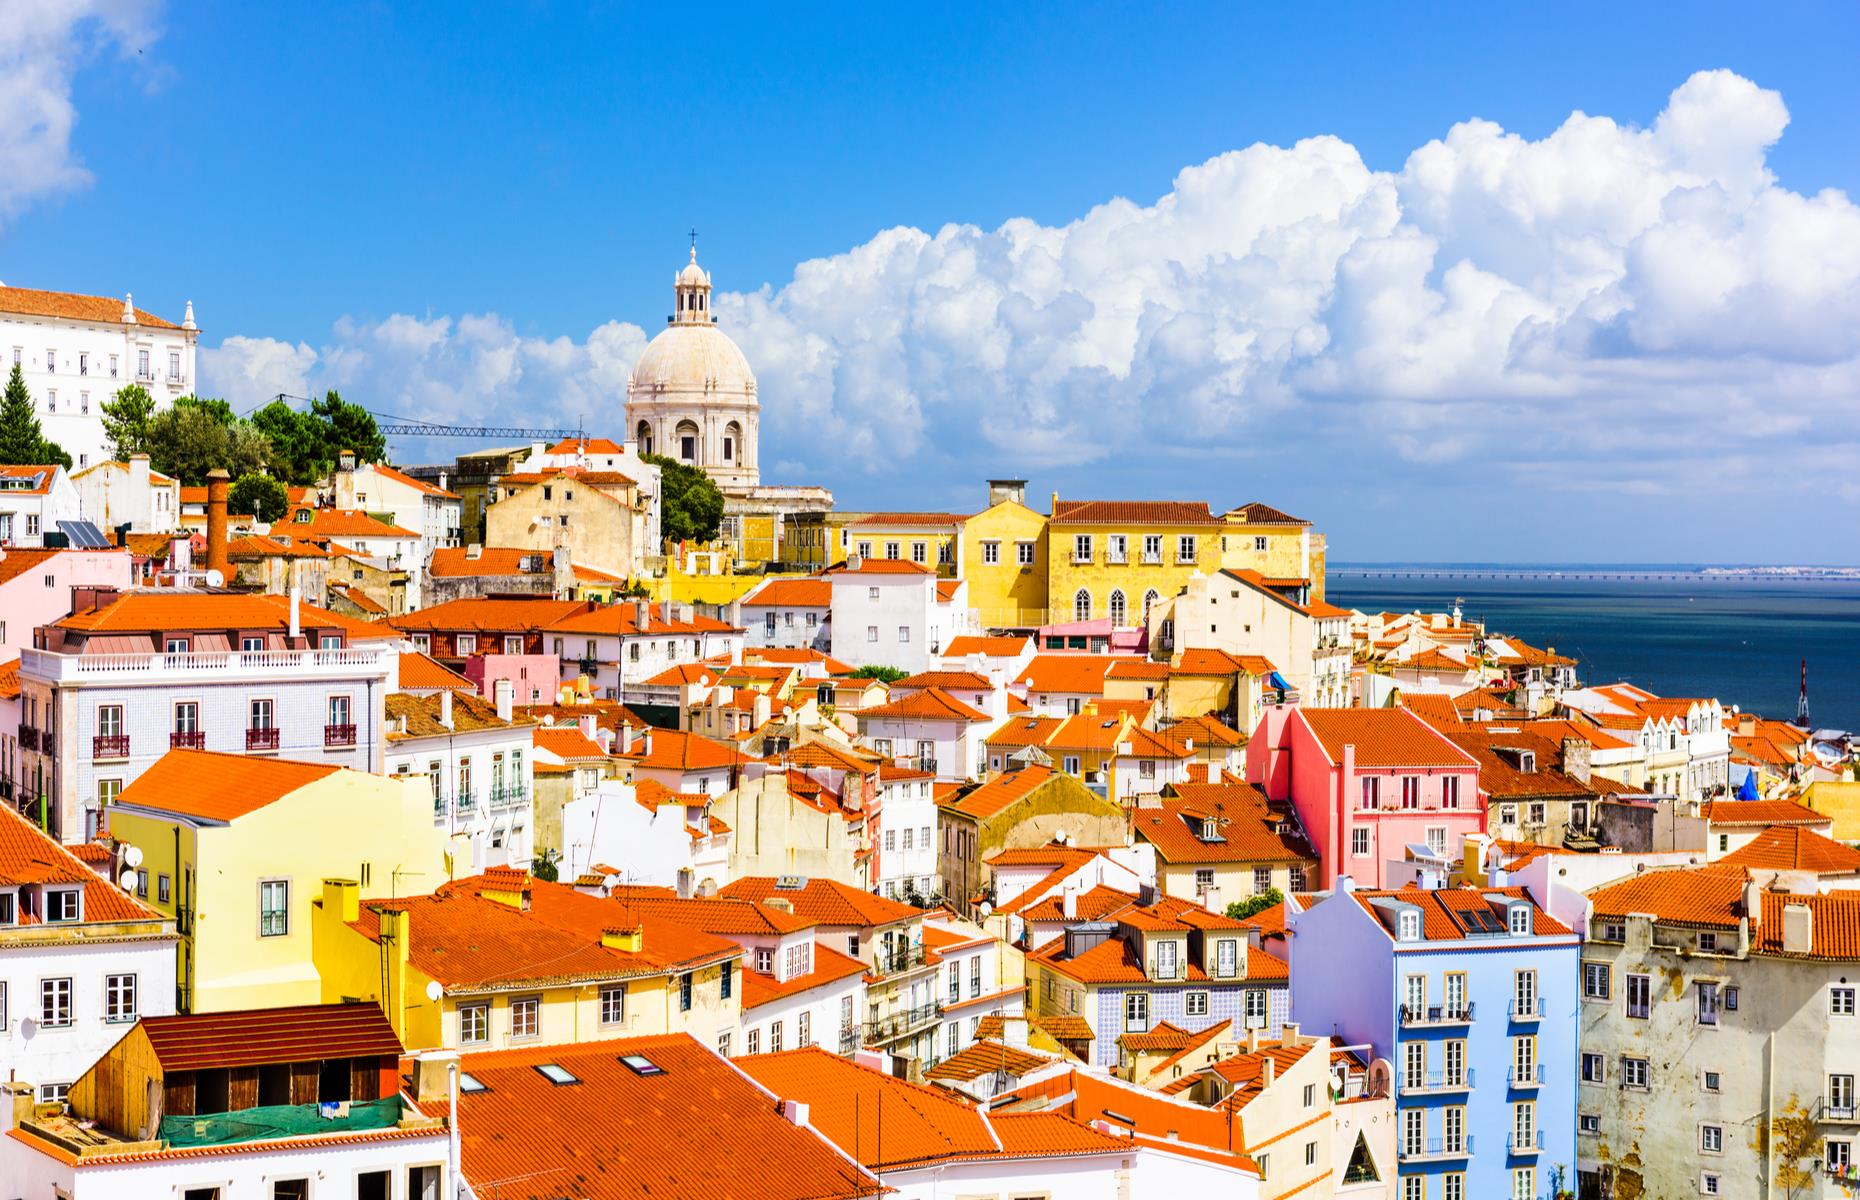 <p>Though it's fallen by one place since last year, Portugal remains one of the world’s safest countries thanks to low crime rates and political stability. That said, it’s worth keeping your wits about you in the big cities, as pickpocketing and petty theft are not uncommon.</p>